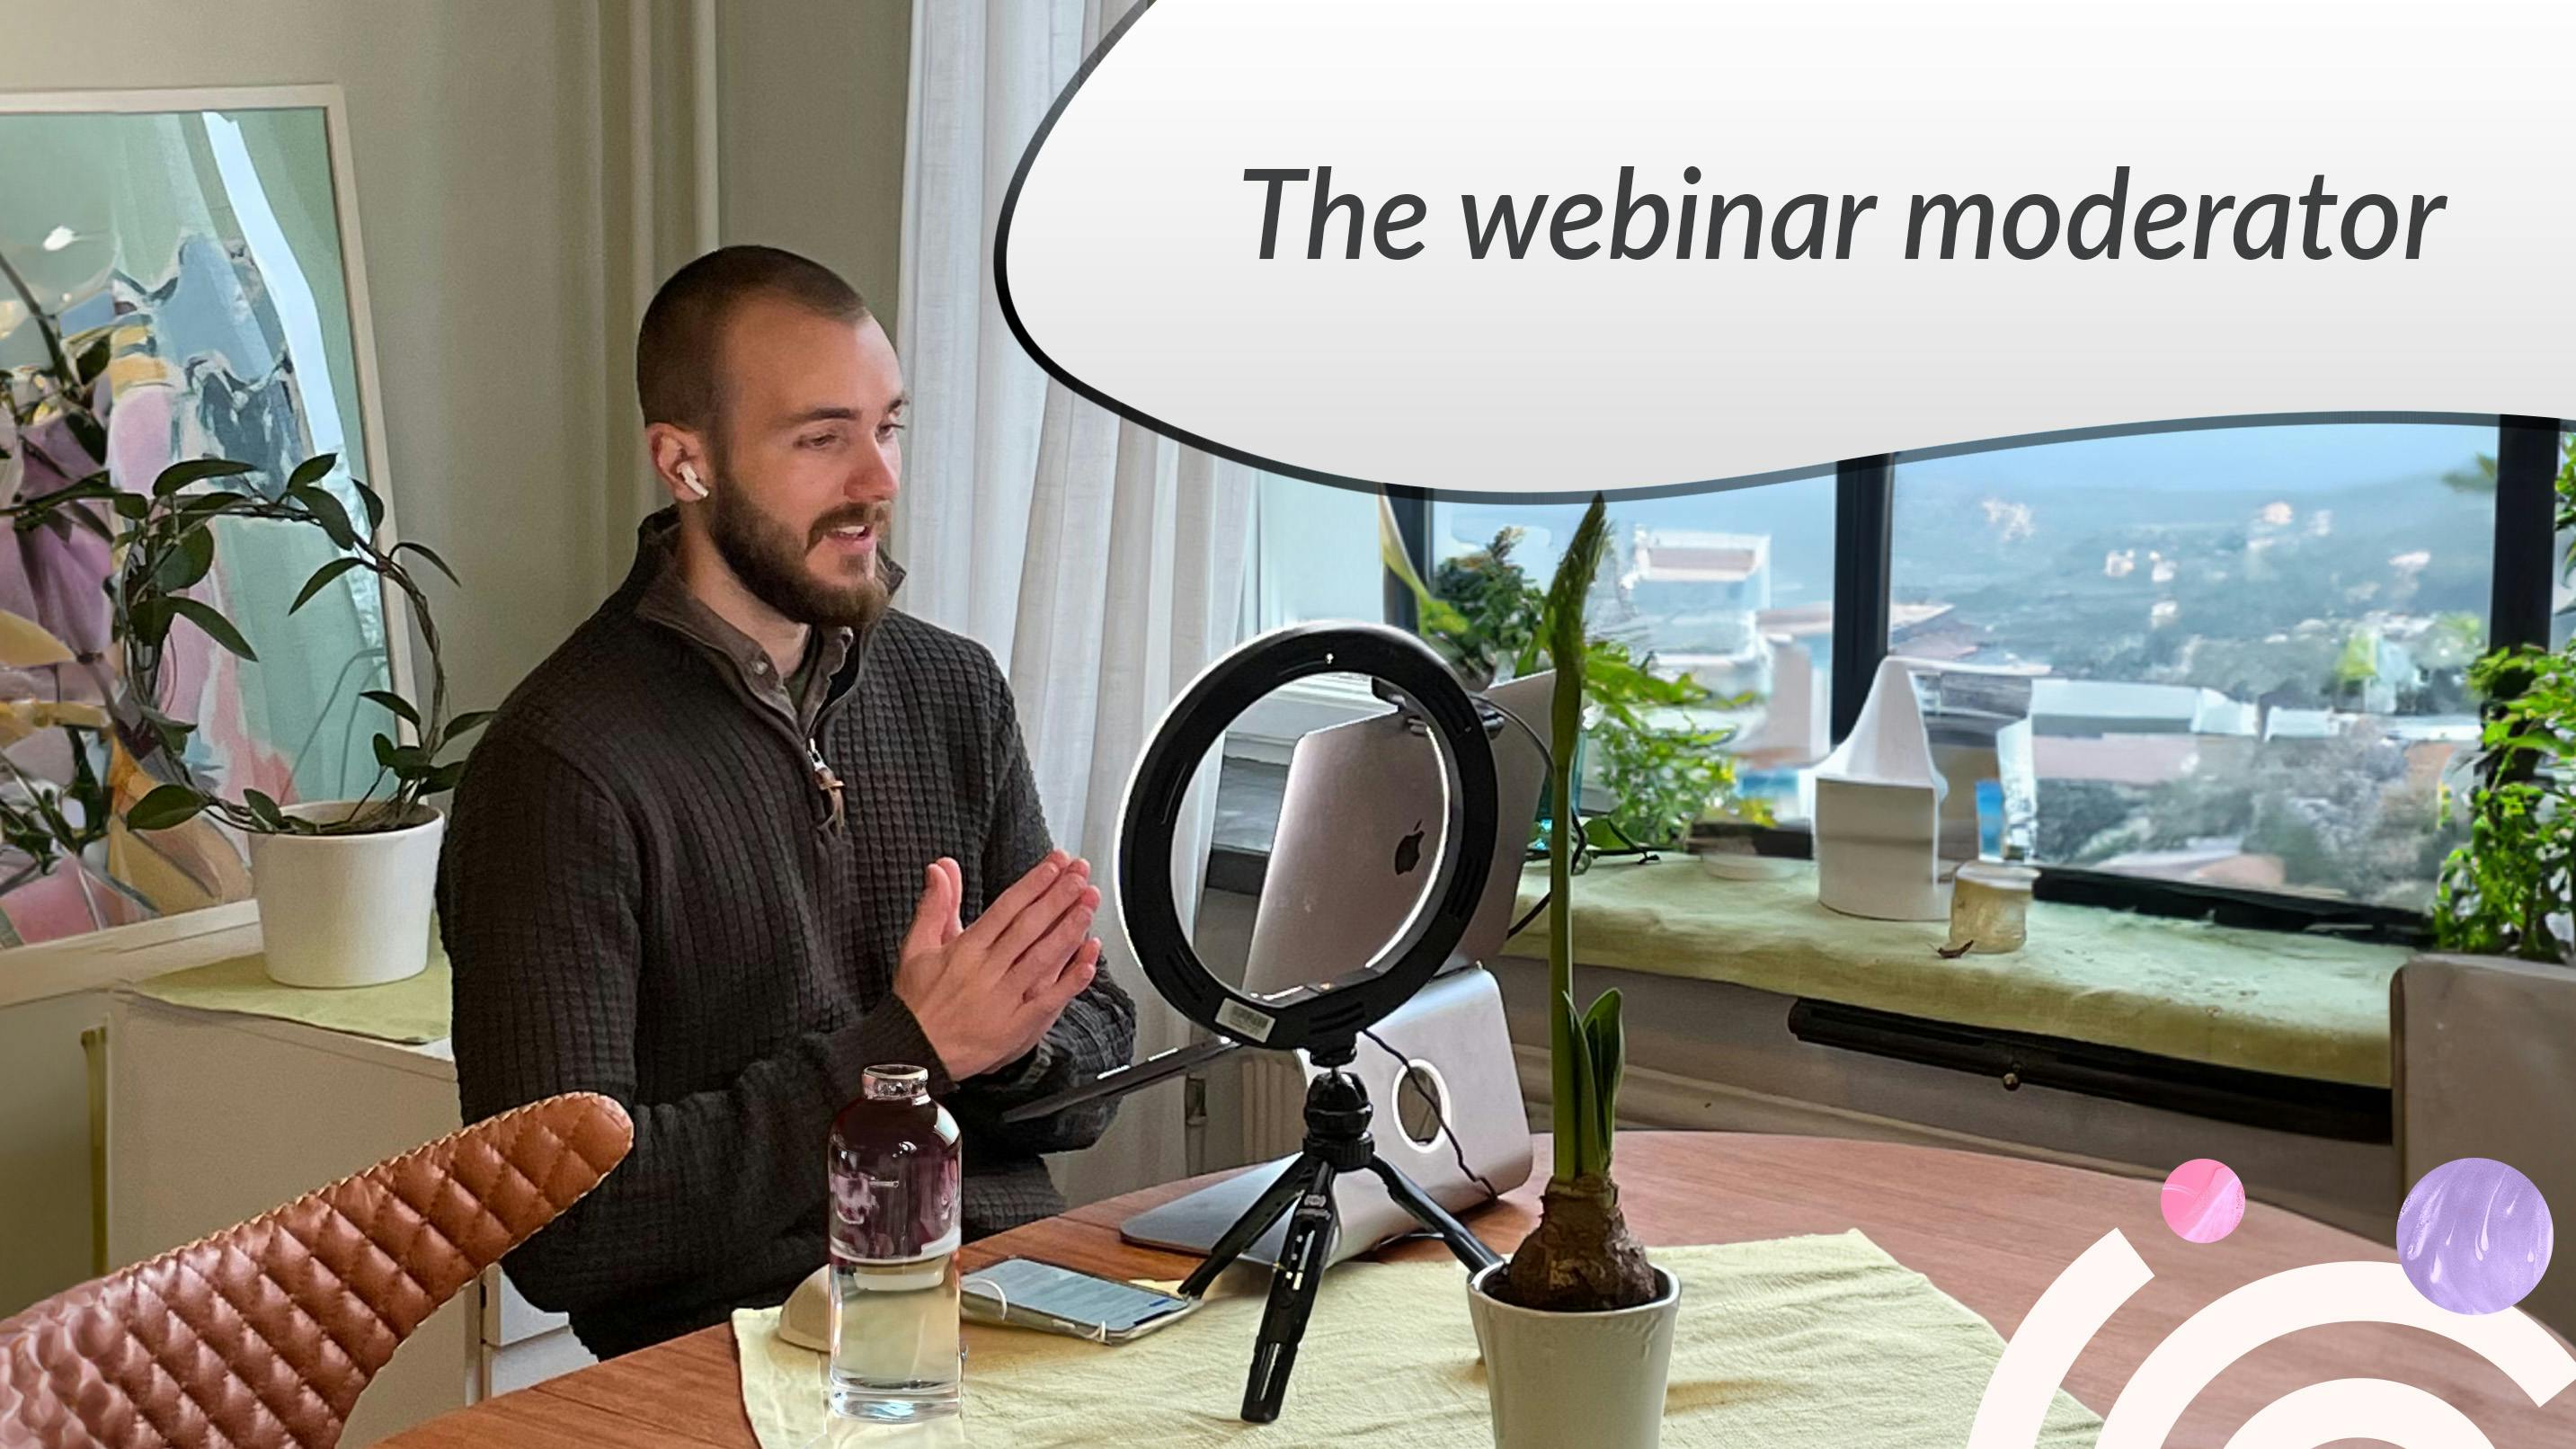 Webinar moderator live in video - with webcam and ring light